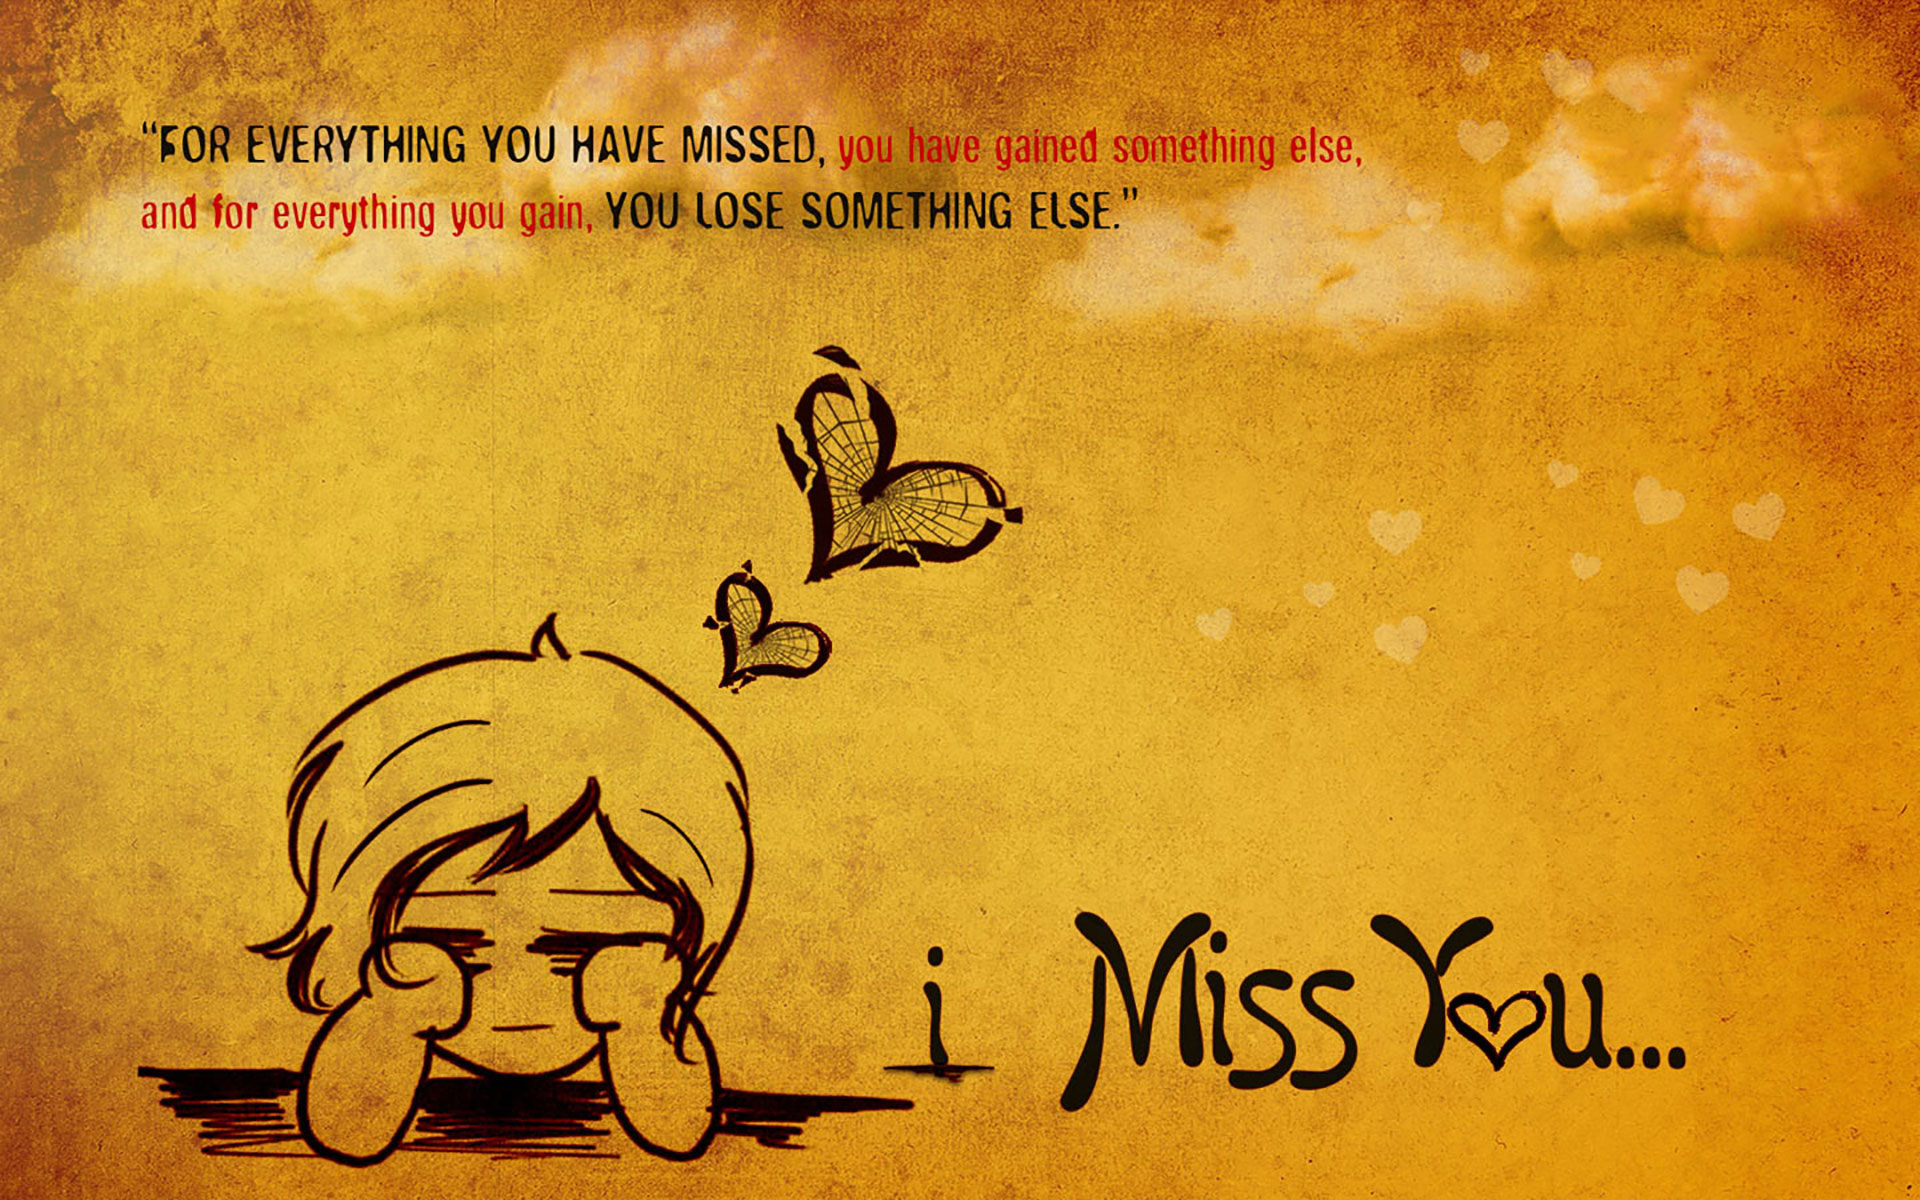 HD I Miss You Wallpaper for him or her-Romantic Wallpapers-Chobirdokan